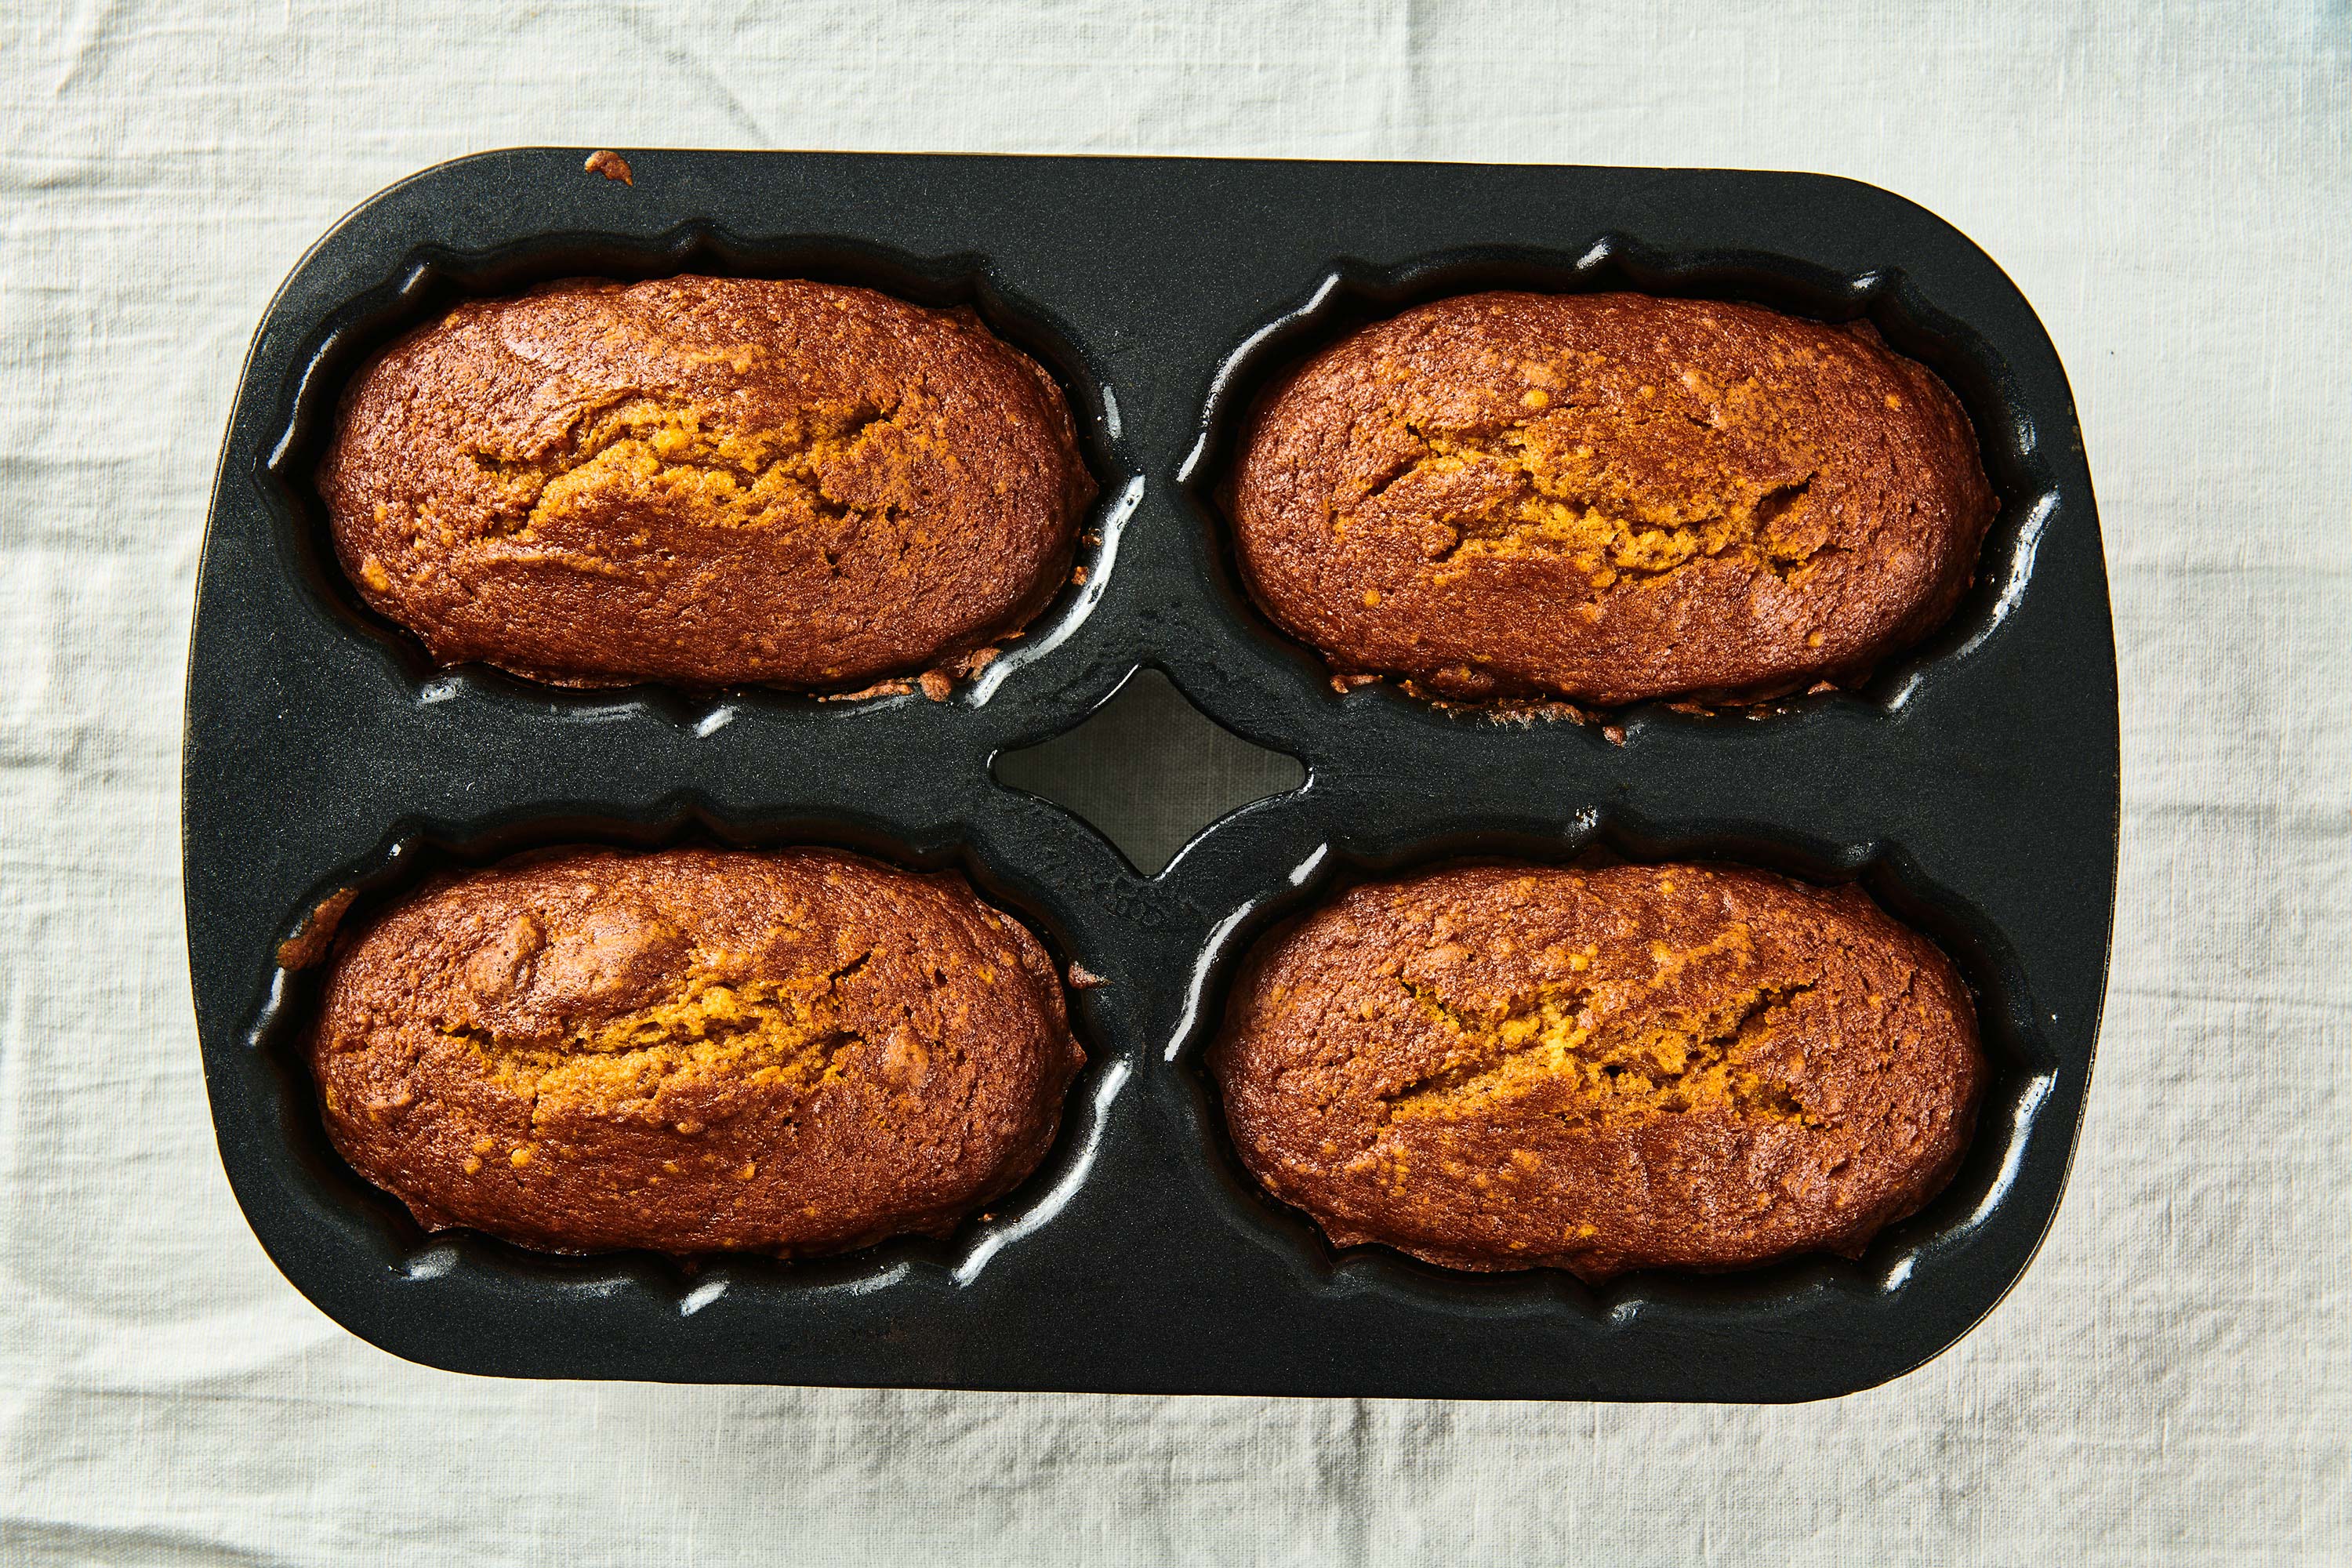 4 loaf pan with baked pumpkin breads in it.